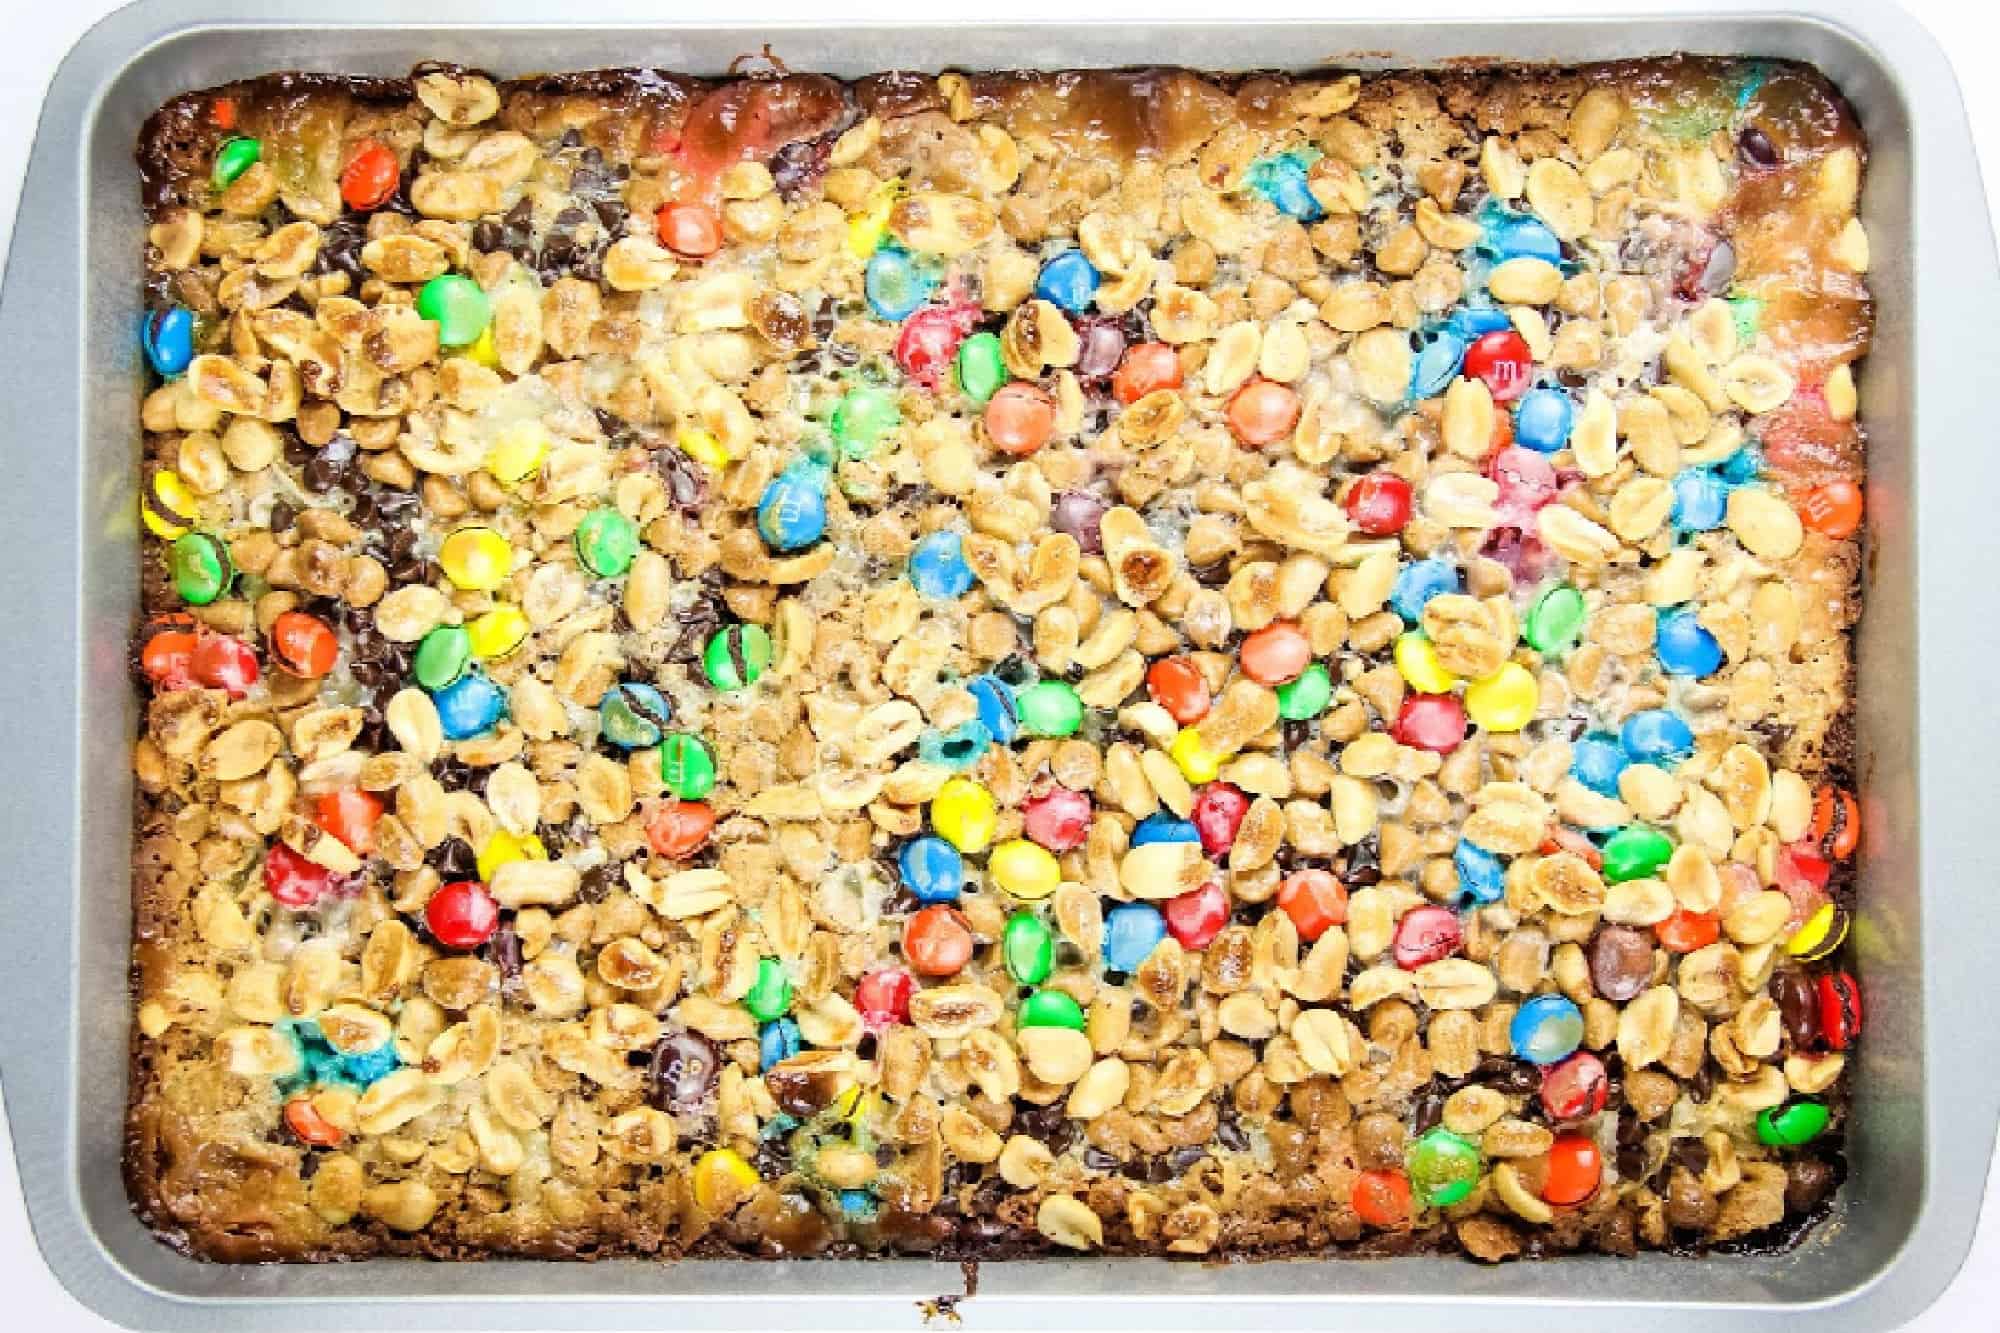 Graham Cracker Cookie Bars topped with m&m's.